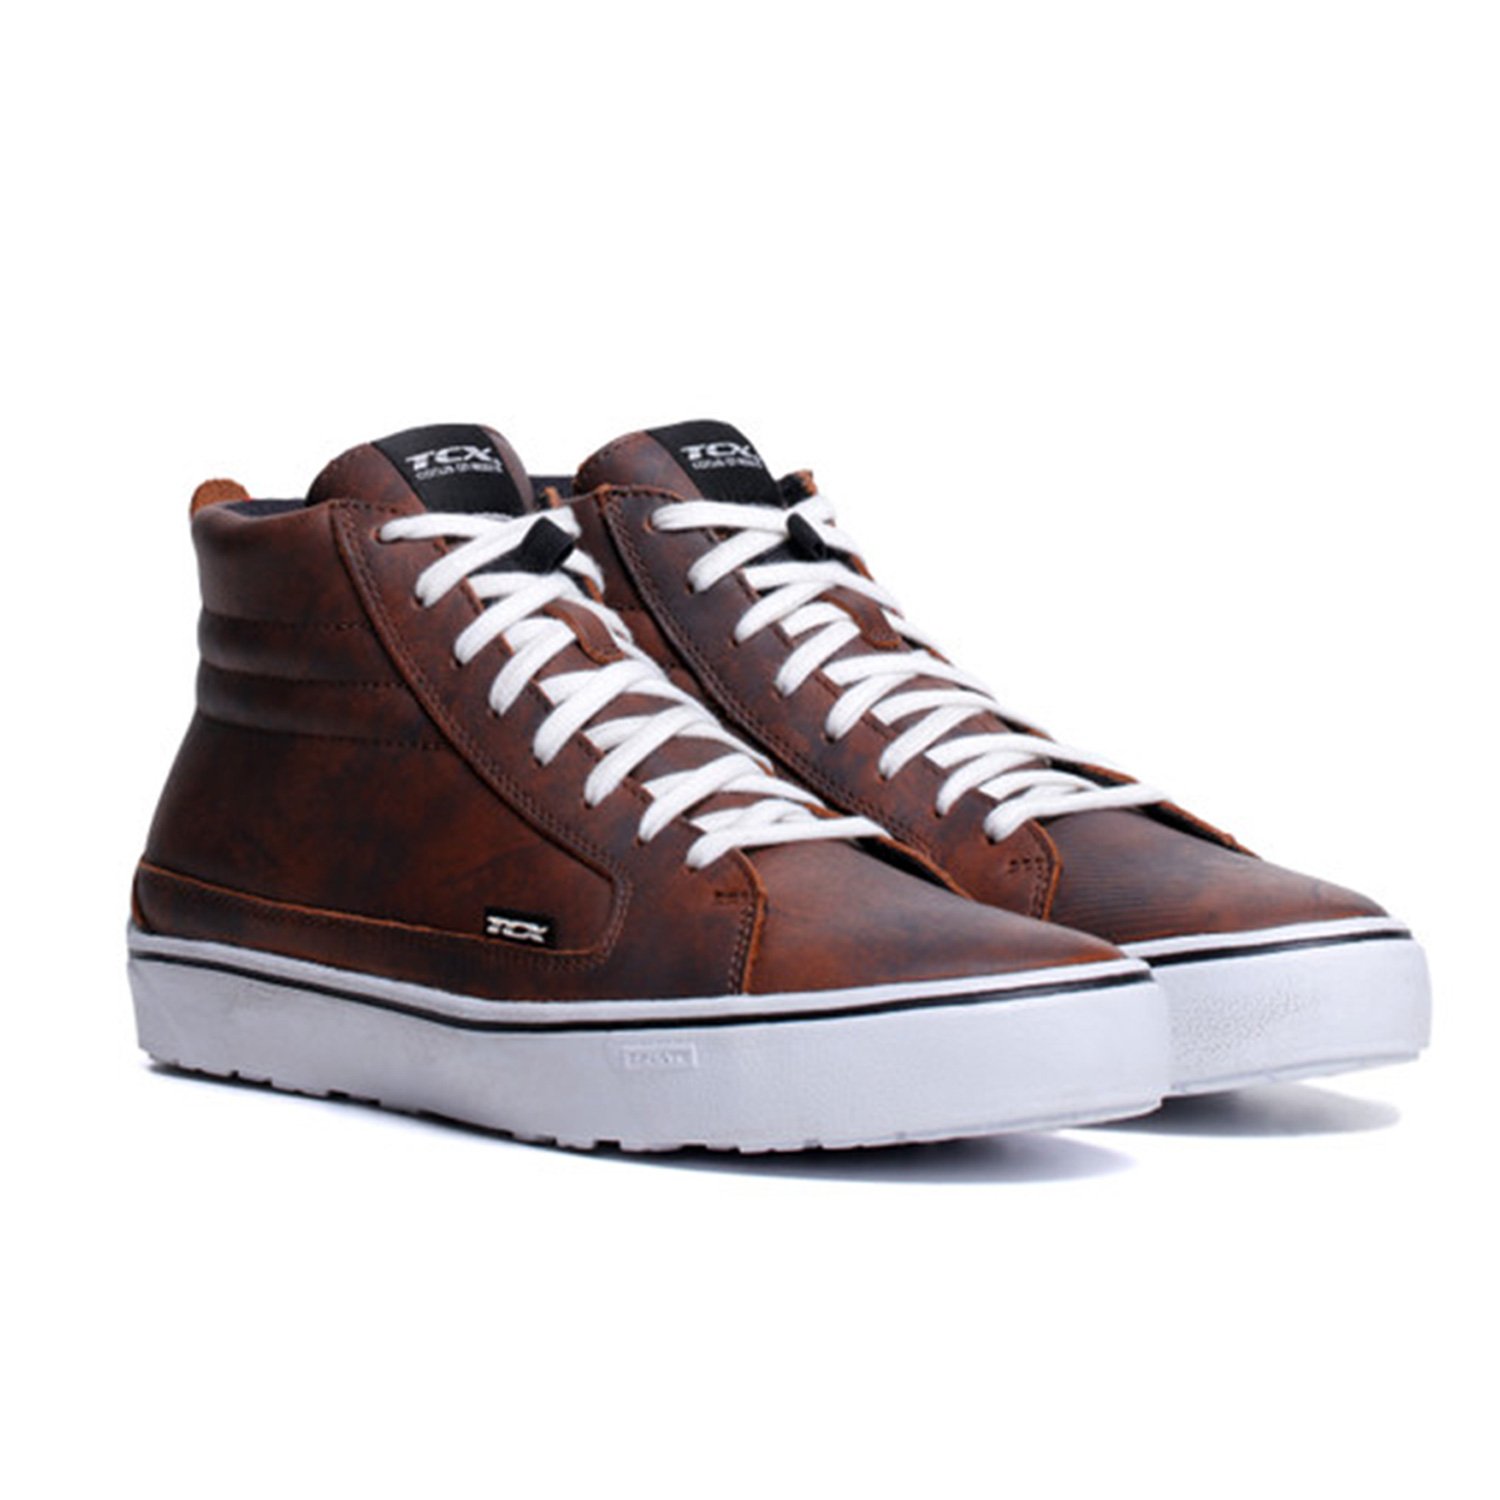 Image of TCX Street 3 WP Brown White Size 38 ID 8051019547811